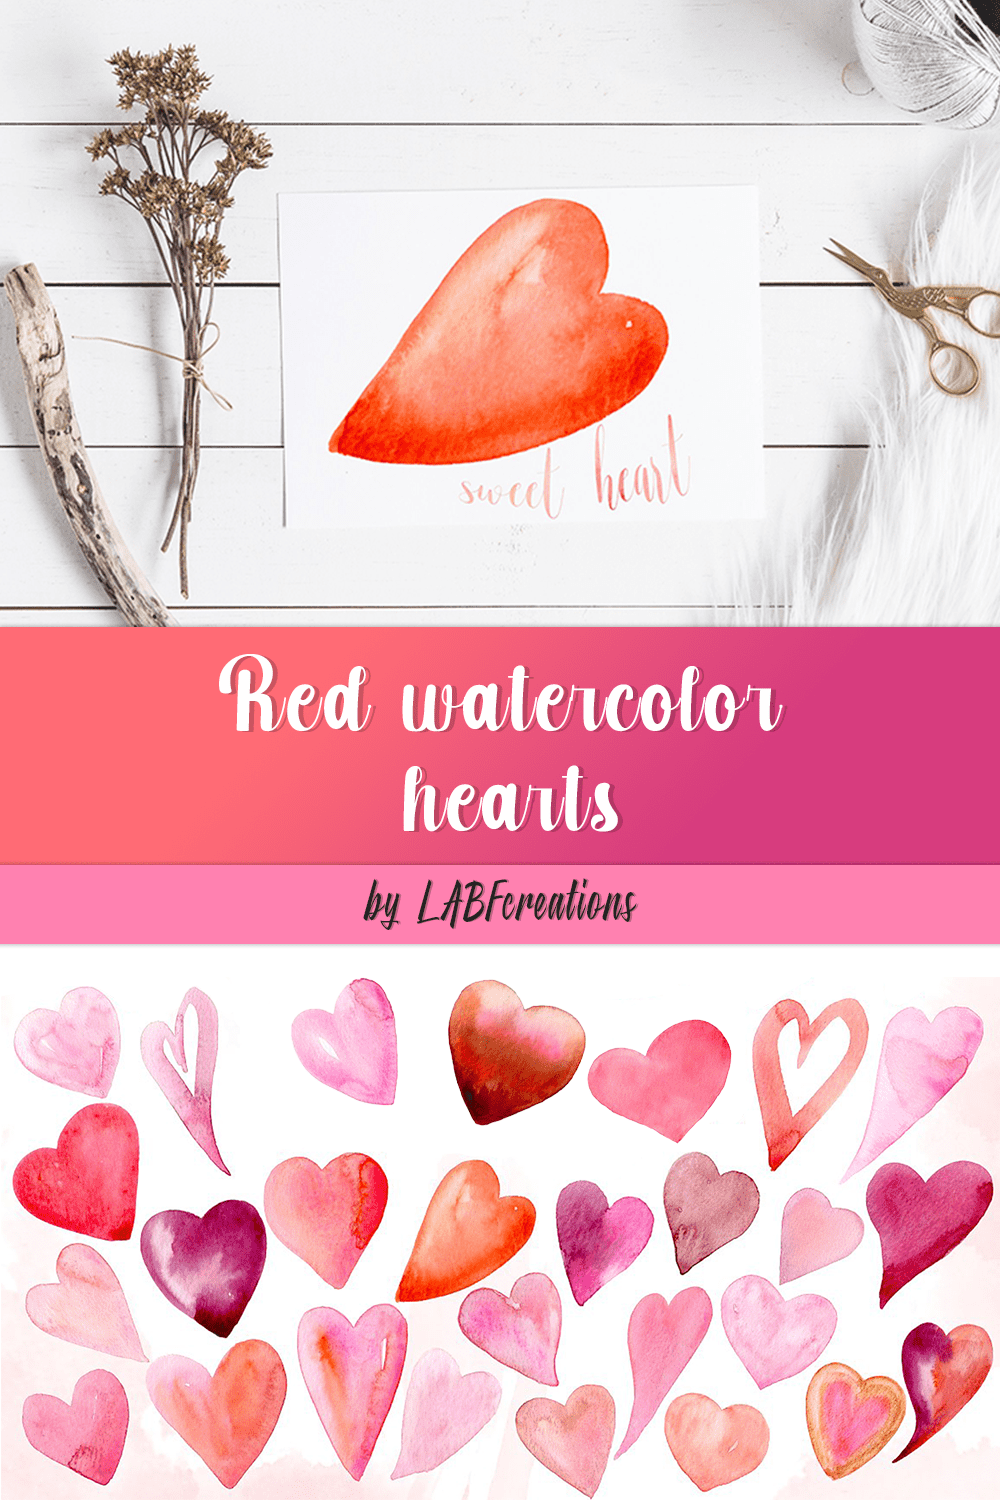 Red Watercolor Hearts - pinterest image preview.